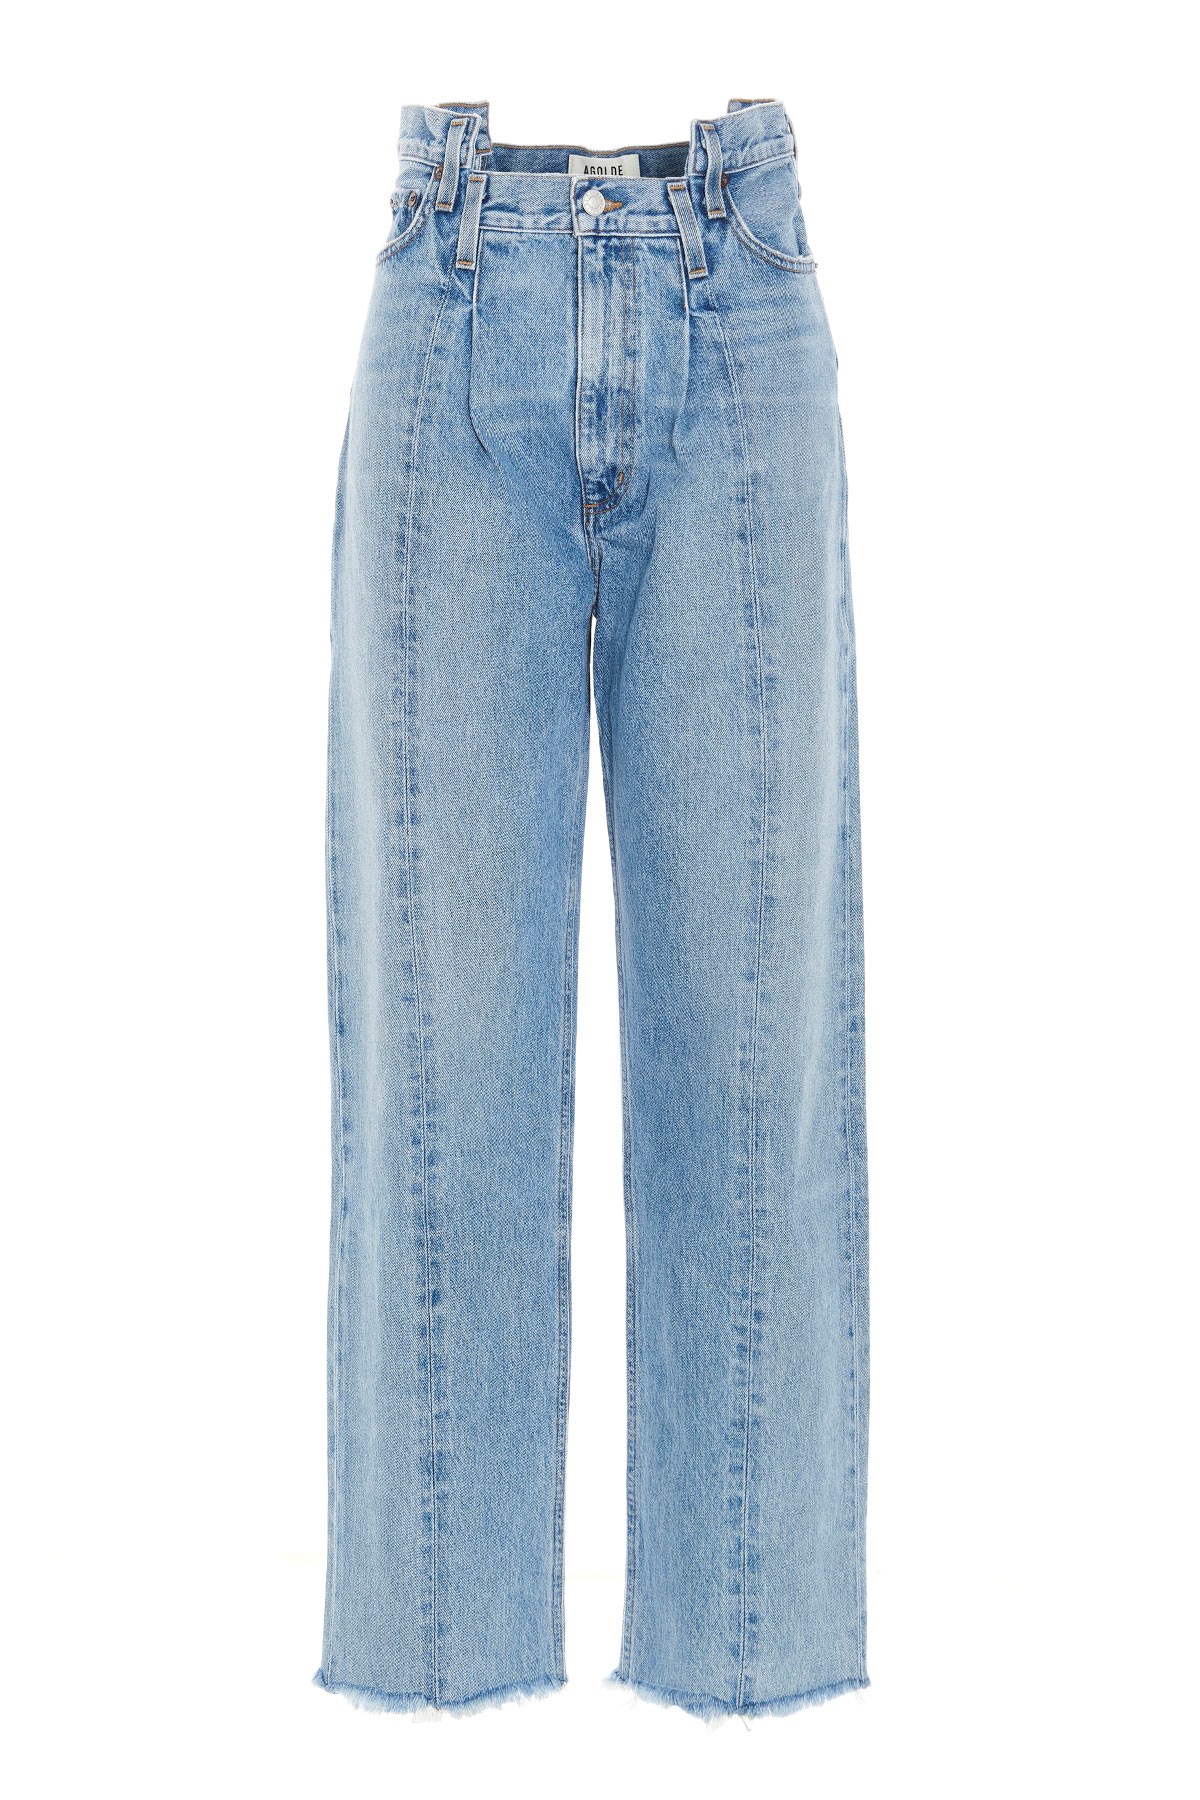 AGOLDE 'Pieced Angled’ Jeans